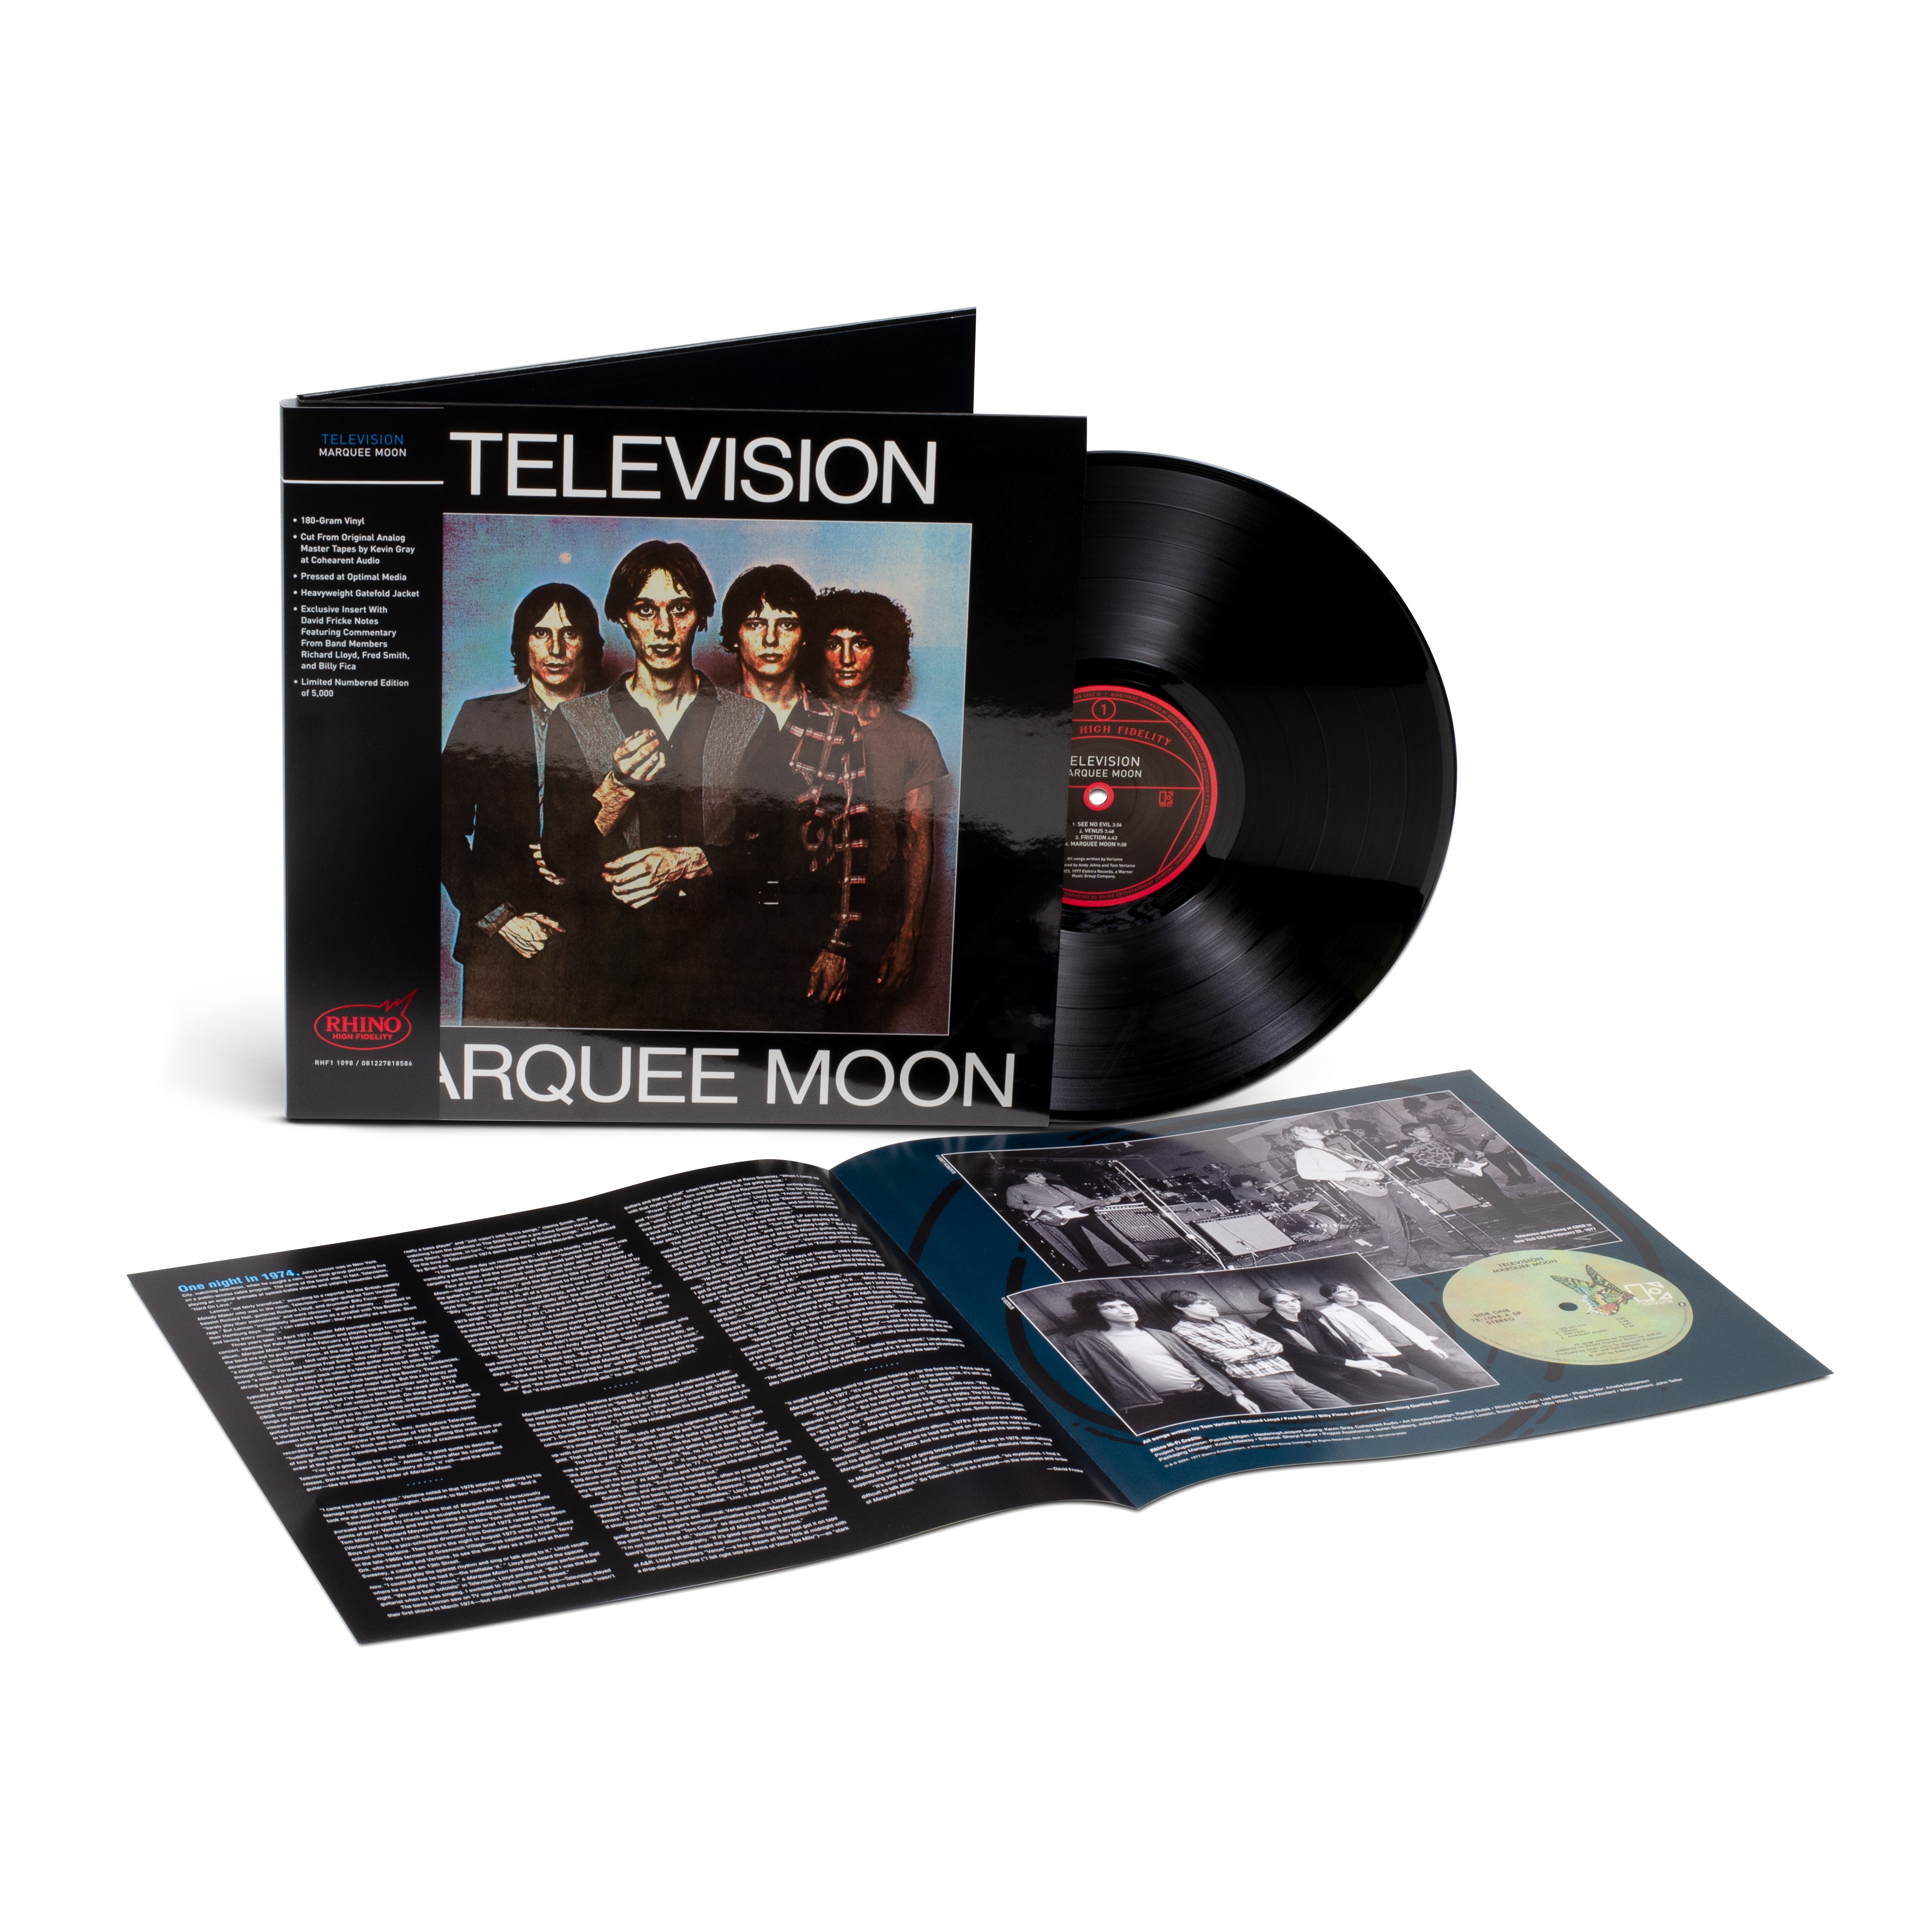  TELEVISION, Marquee Moon USA 1st pressing EXCELLENT